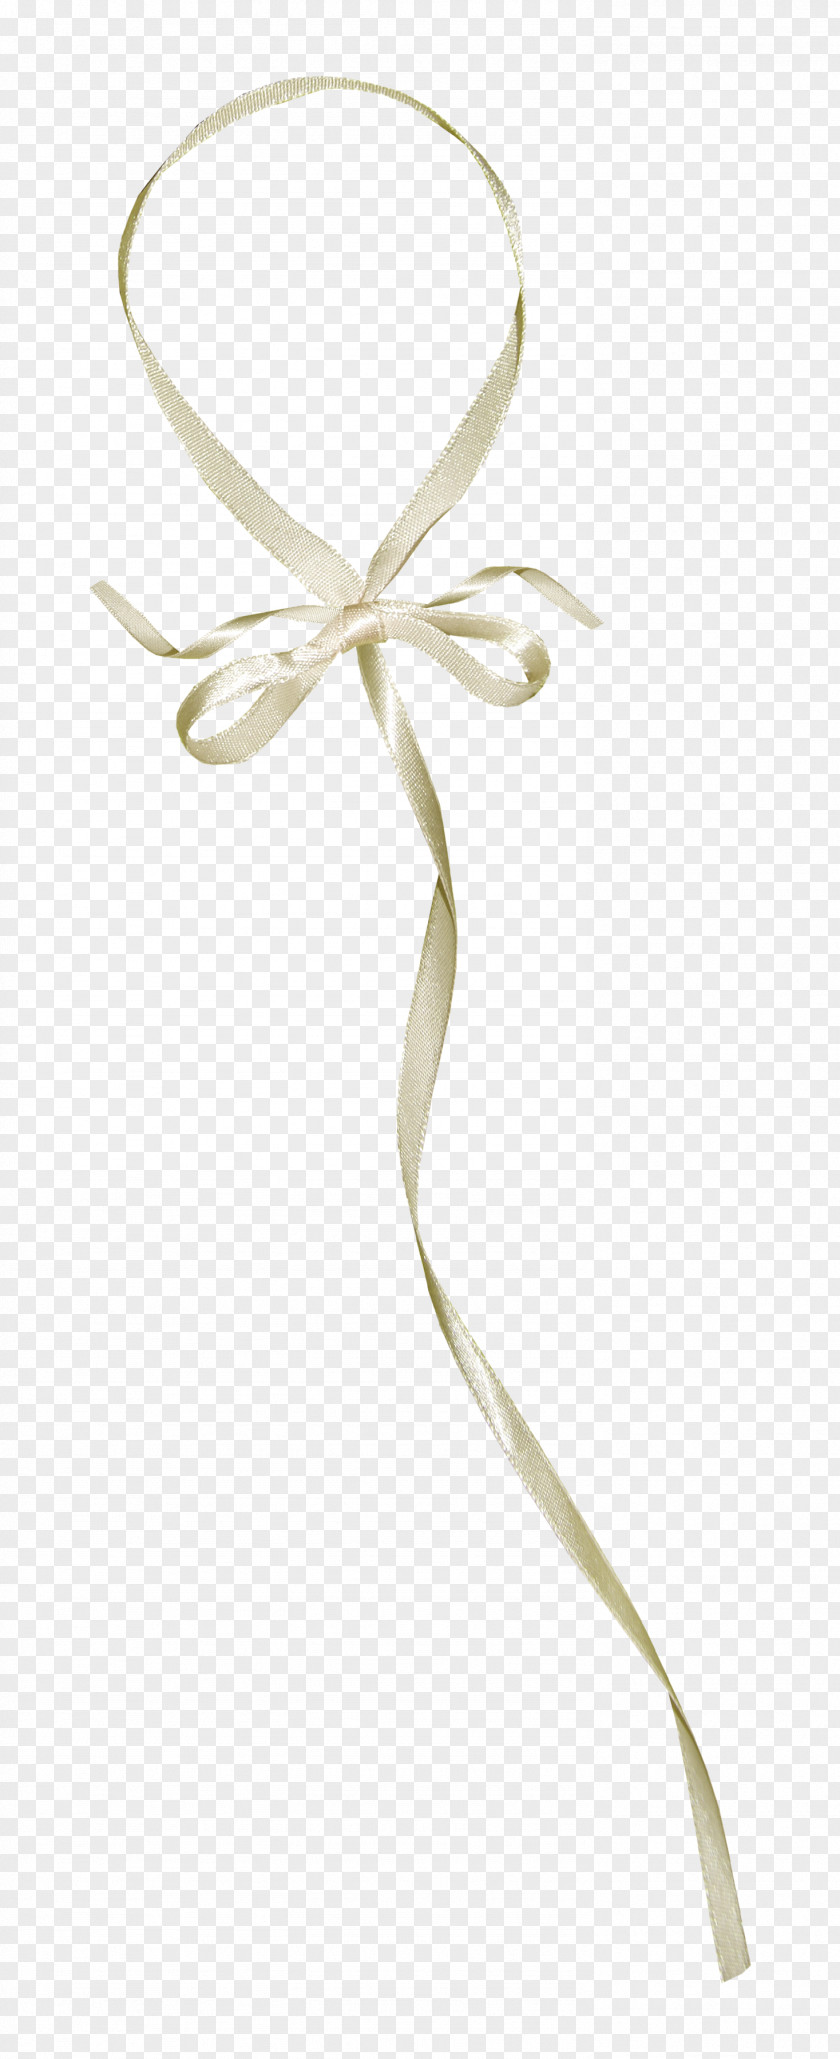 Gold Ribbon Bow Paper Shoelace Knot PNG